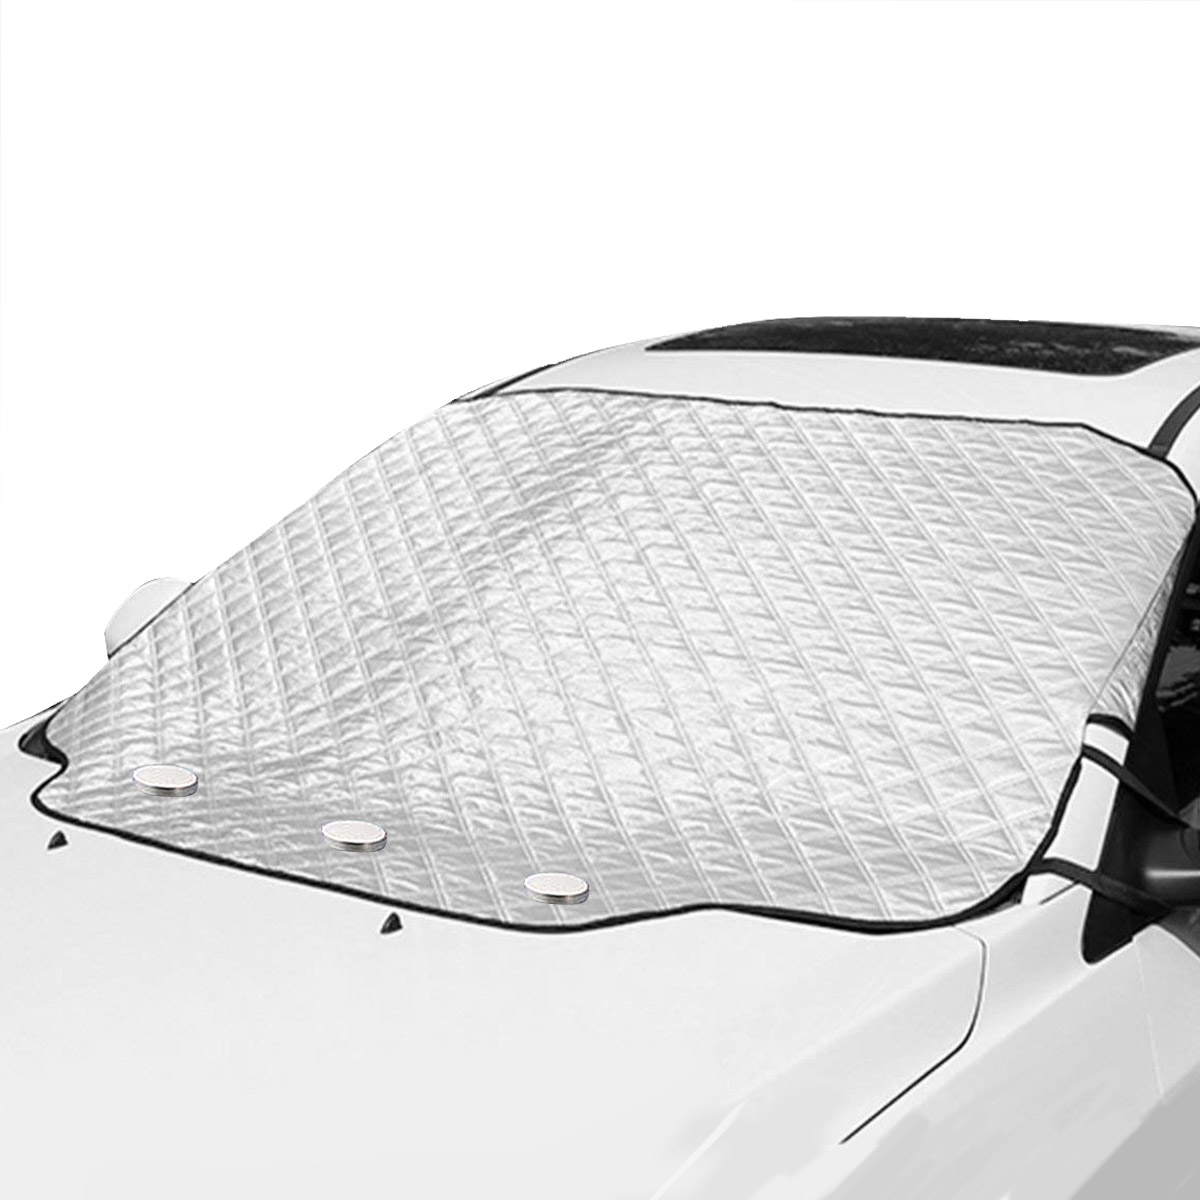 MATCC Car Windshield Cover Sun Shade Magnetic Frost Guard Winter Summer Sun Protector Cotton Thicker Snow Protection Cover Winter Snow Removal Magnetic Edges Fits Most Car 